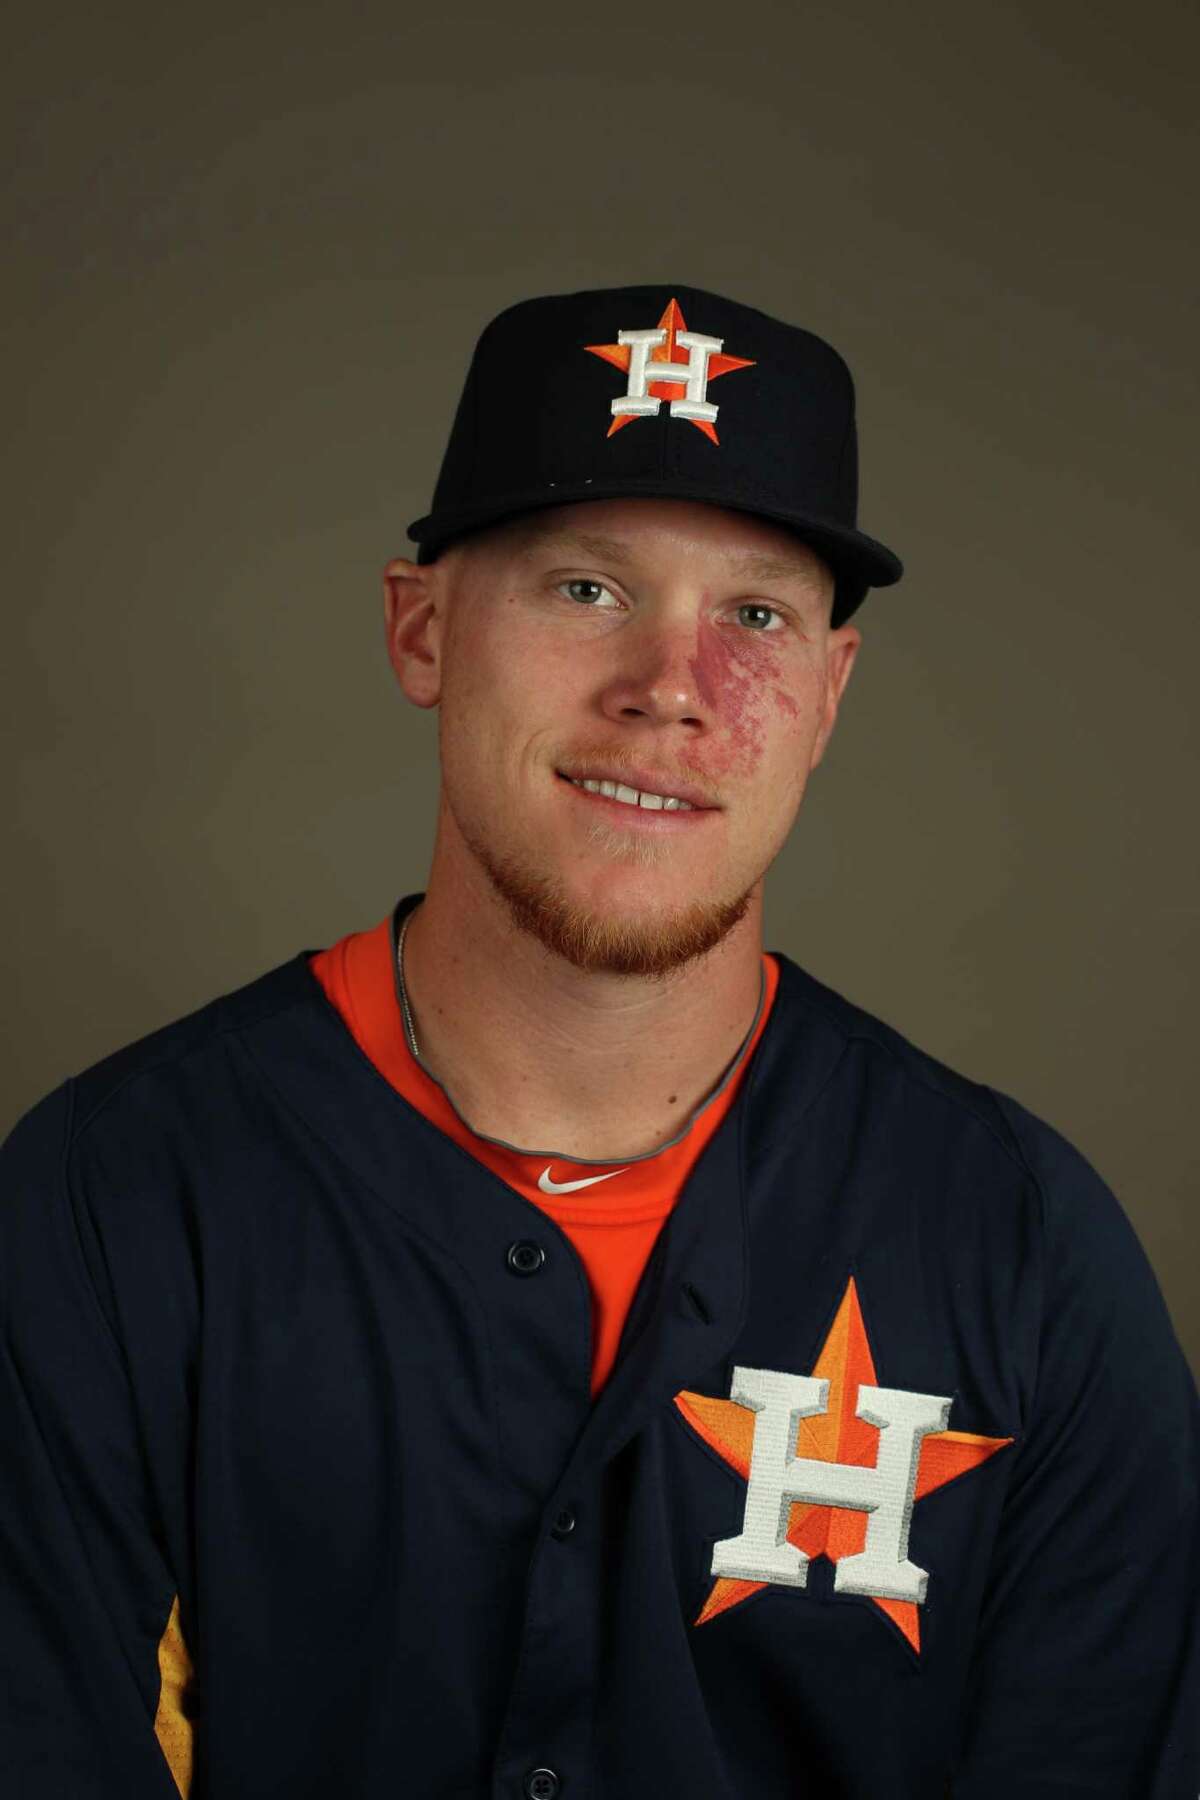 Houston Astros Roster In 2013: State Of The Union